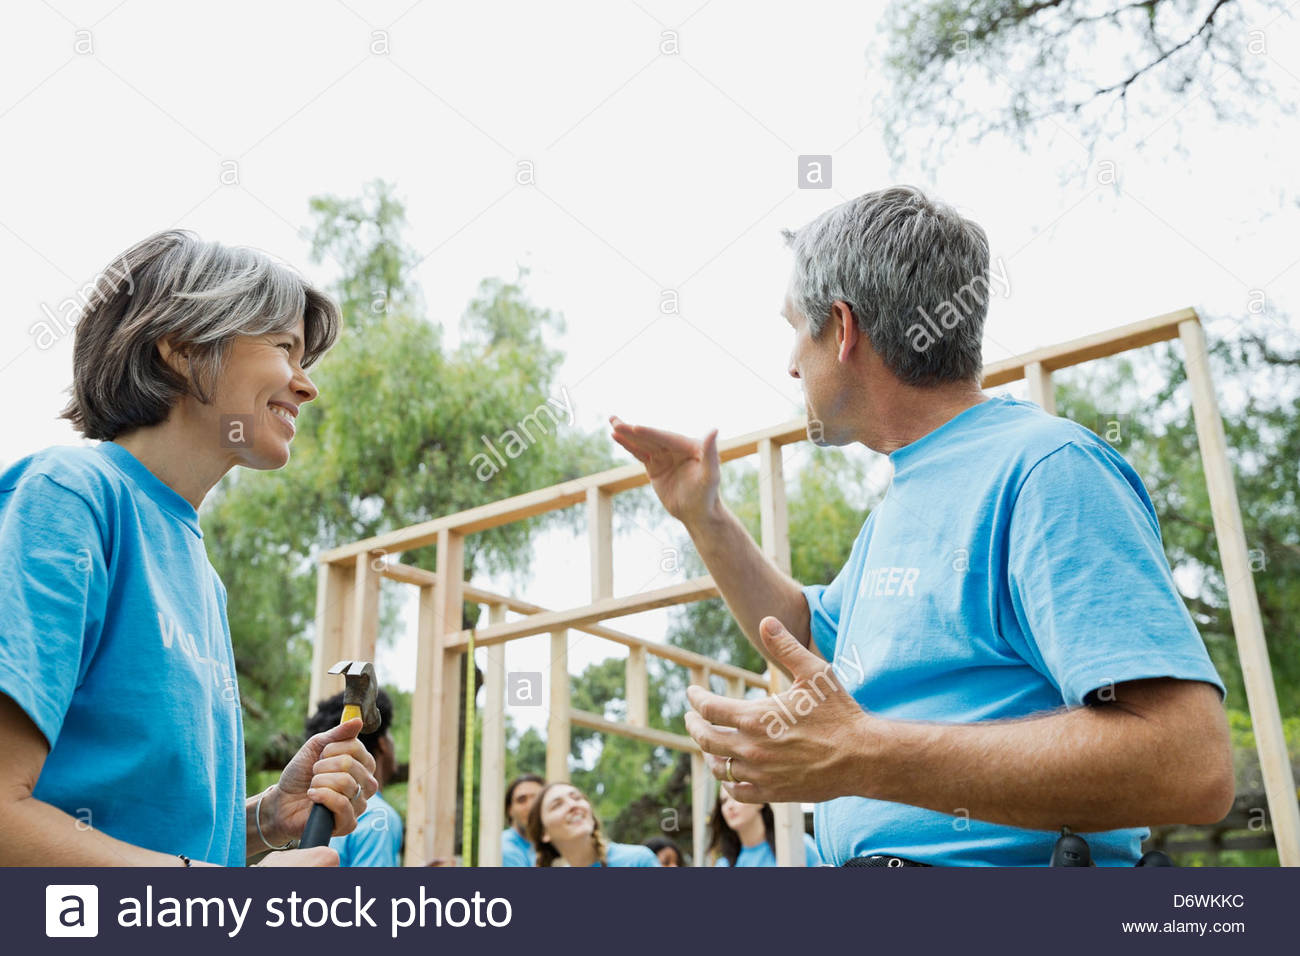 Mature man and woman talking while volunteers build wooden frame in background Stock Photo